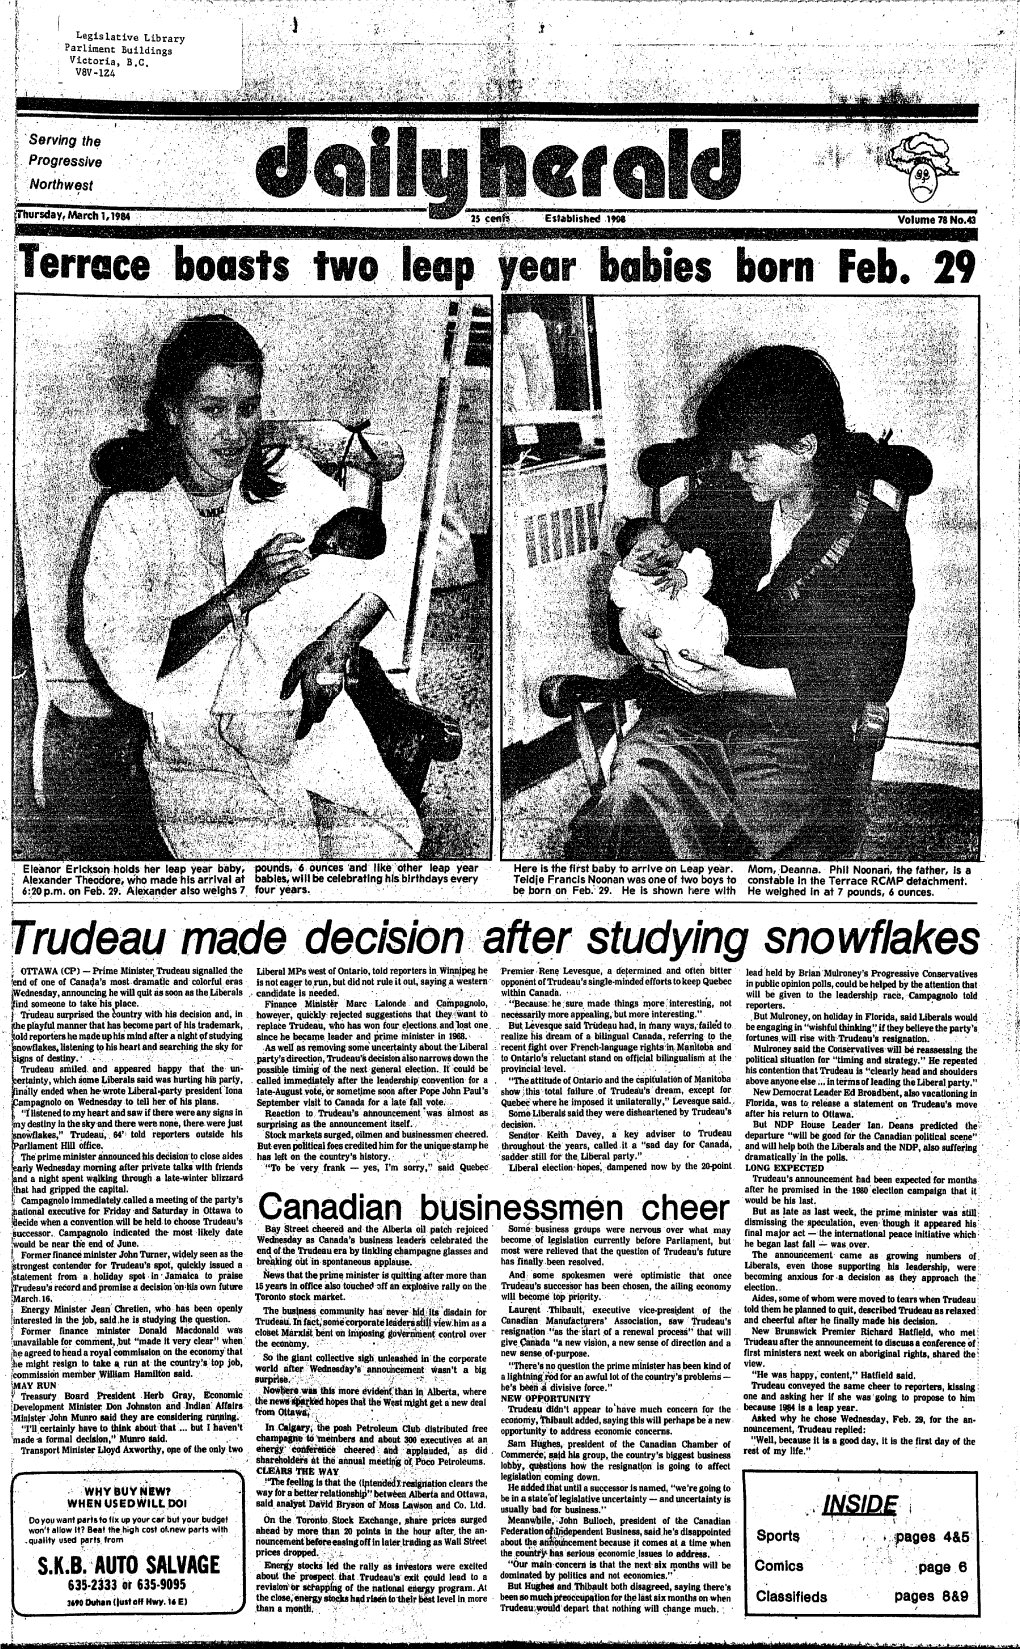 Trudeau Made Ida C/S/On I Fter Studying Sno Wflakes